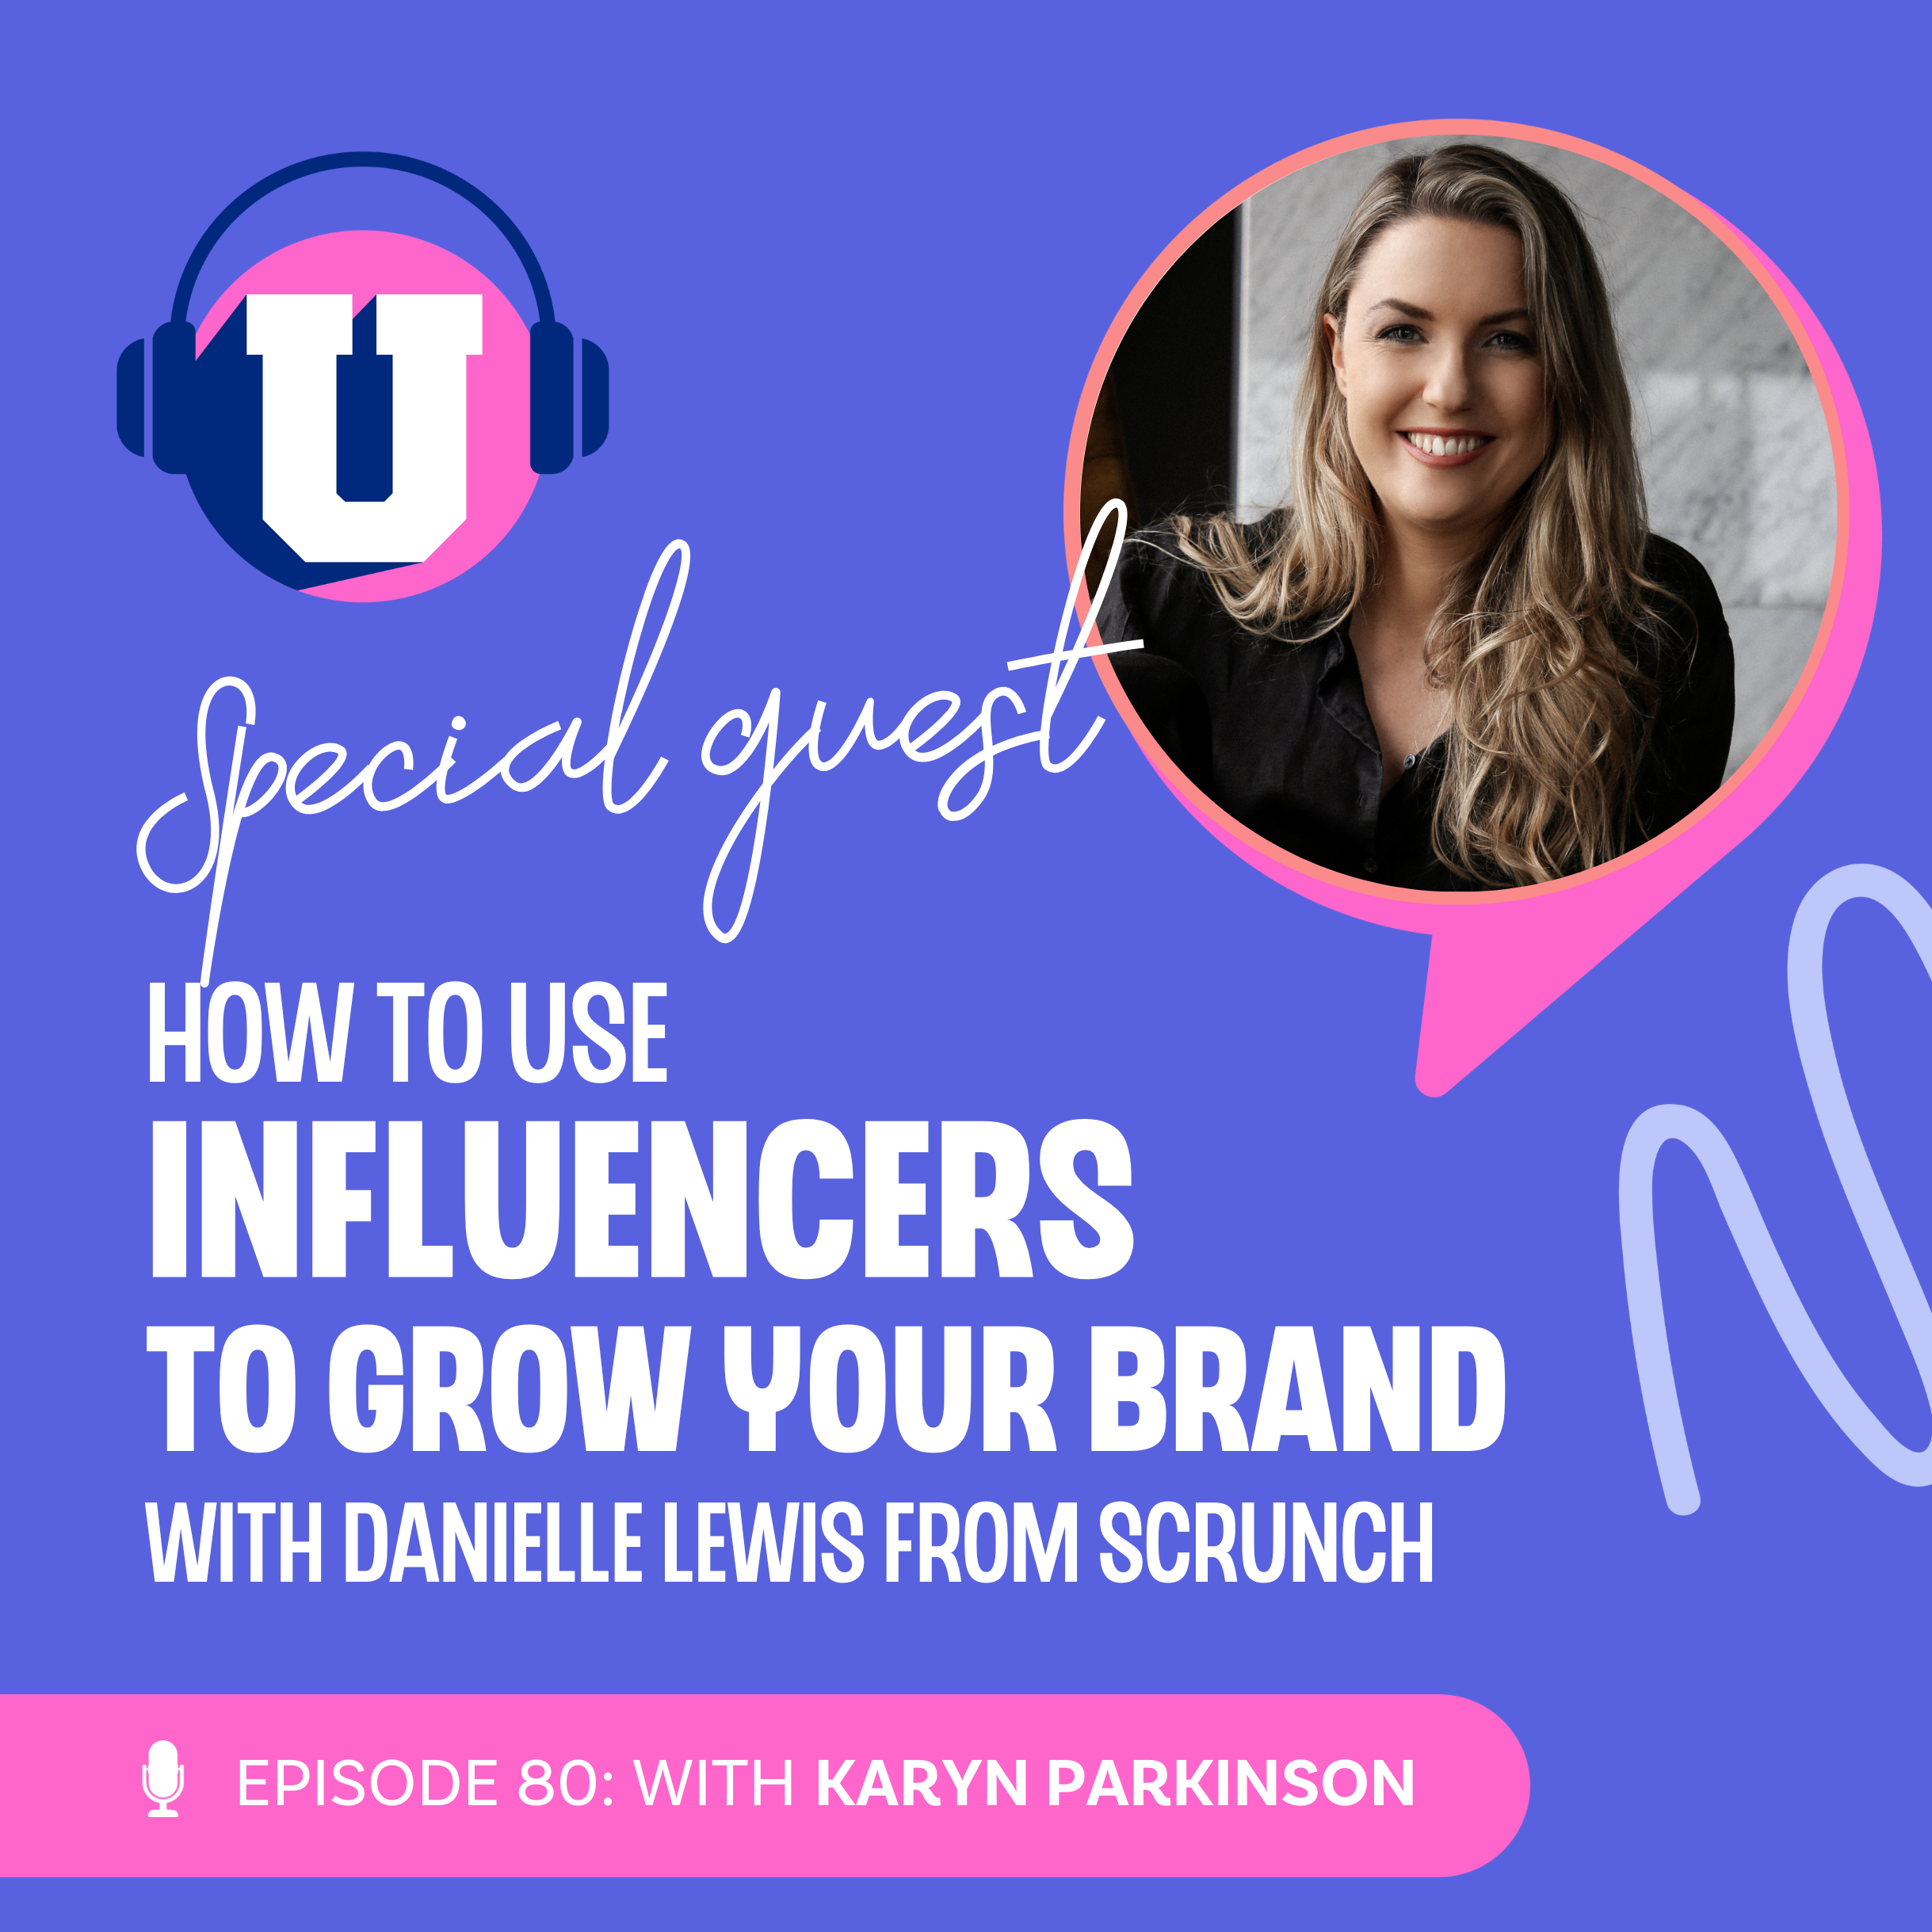 How to use Influencers to grow your brand with Danielle Lewis of Scrunch